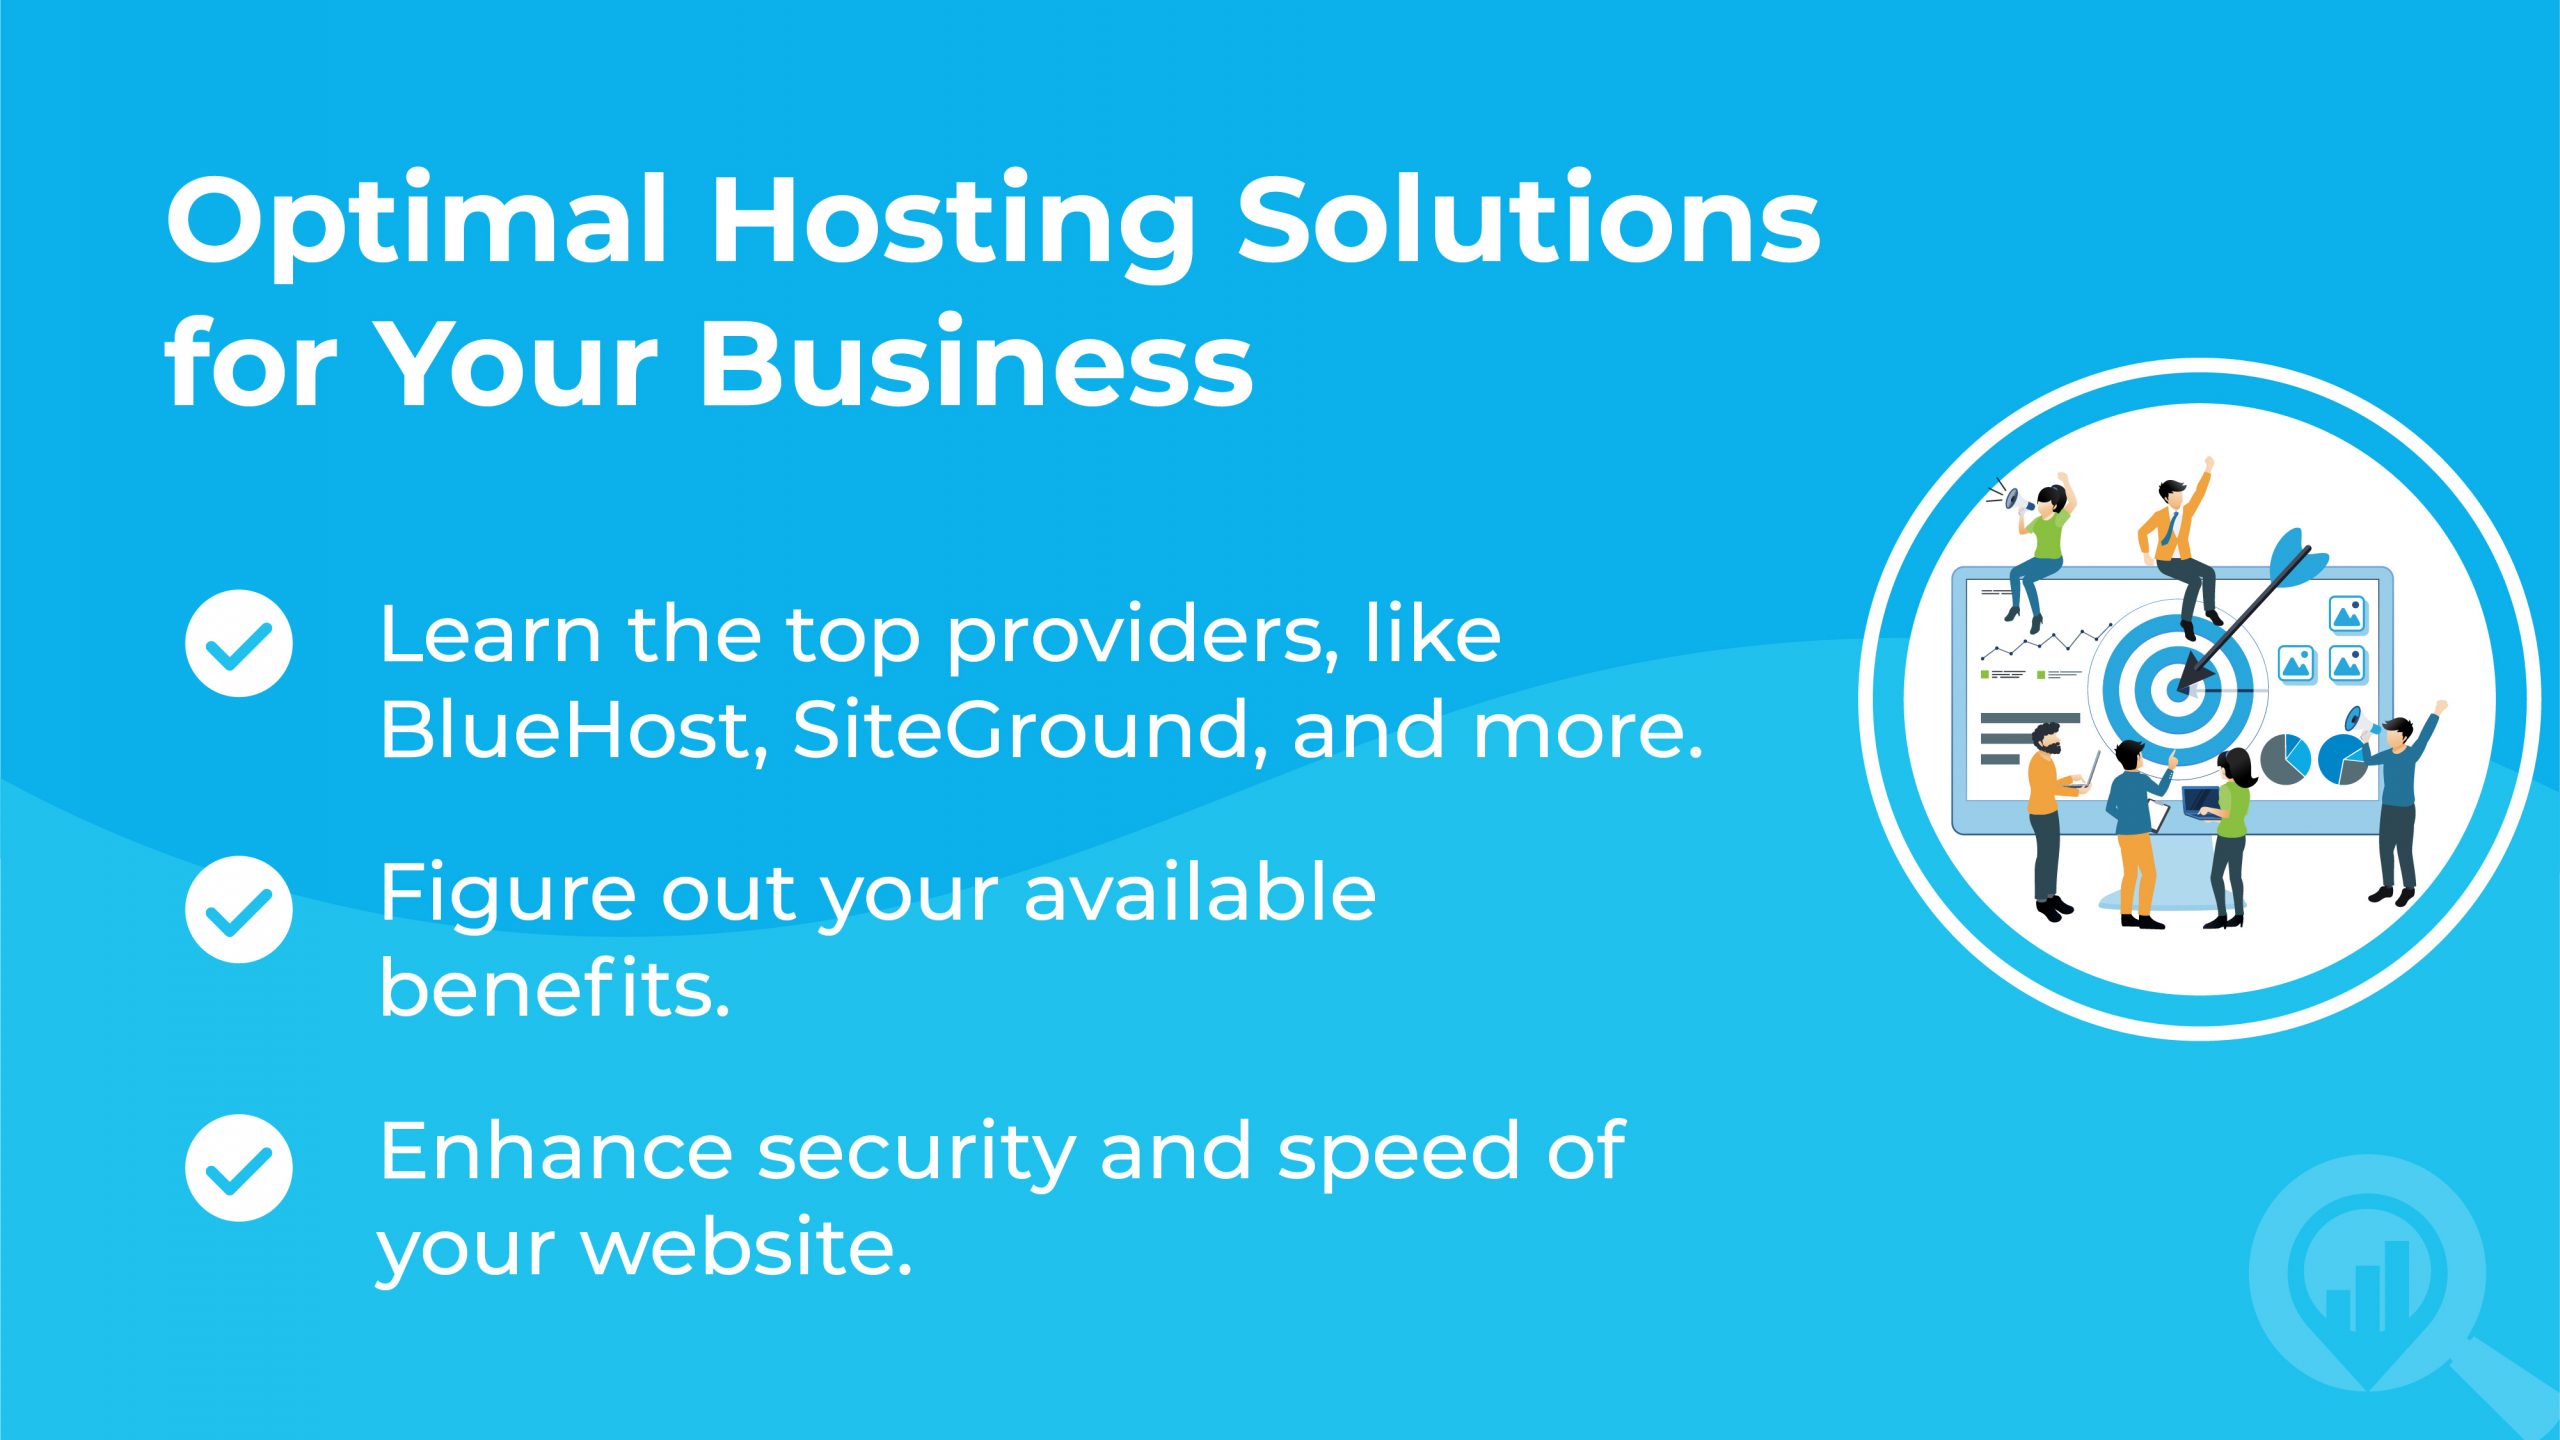 Optimal Hosting Solutions for your Business